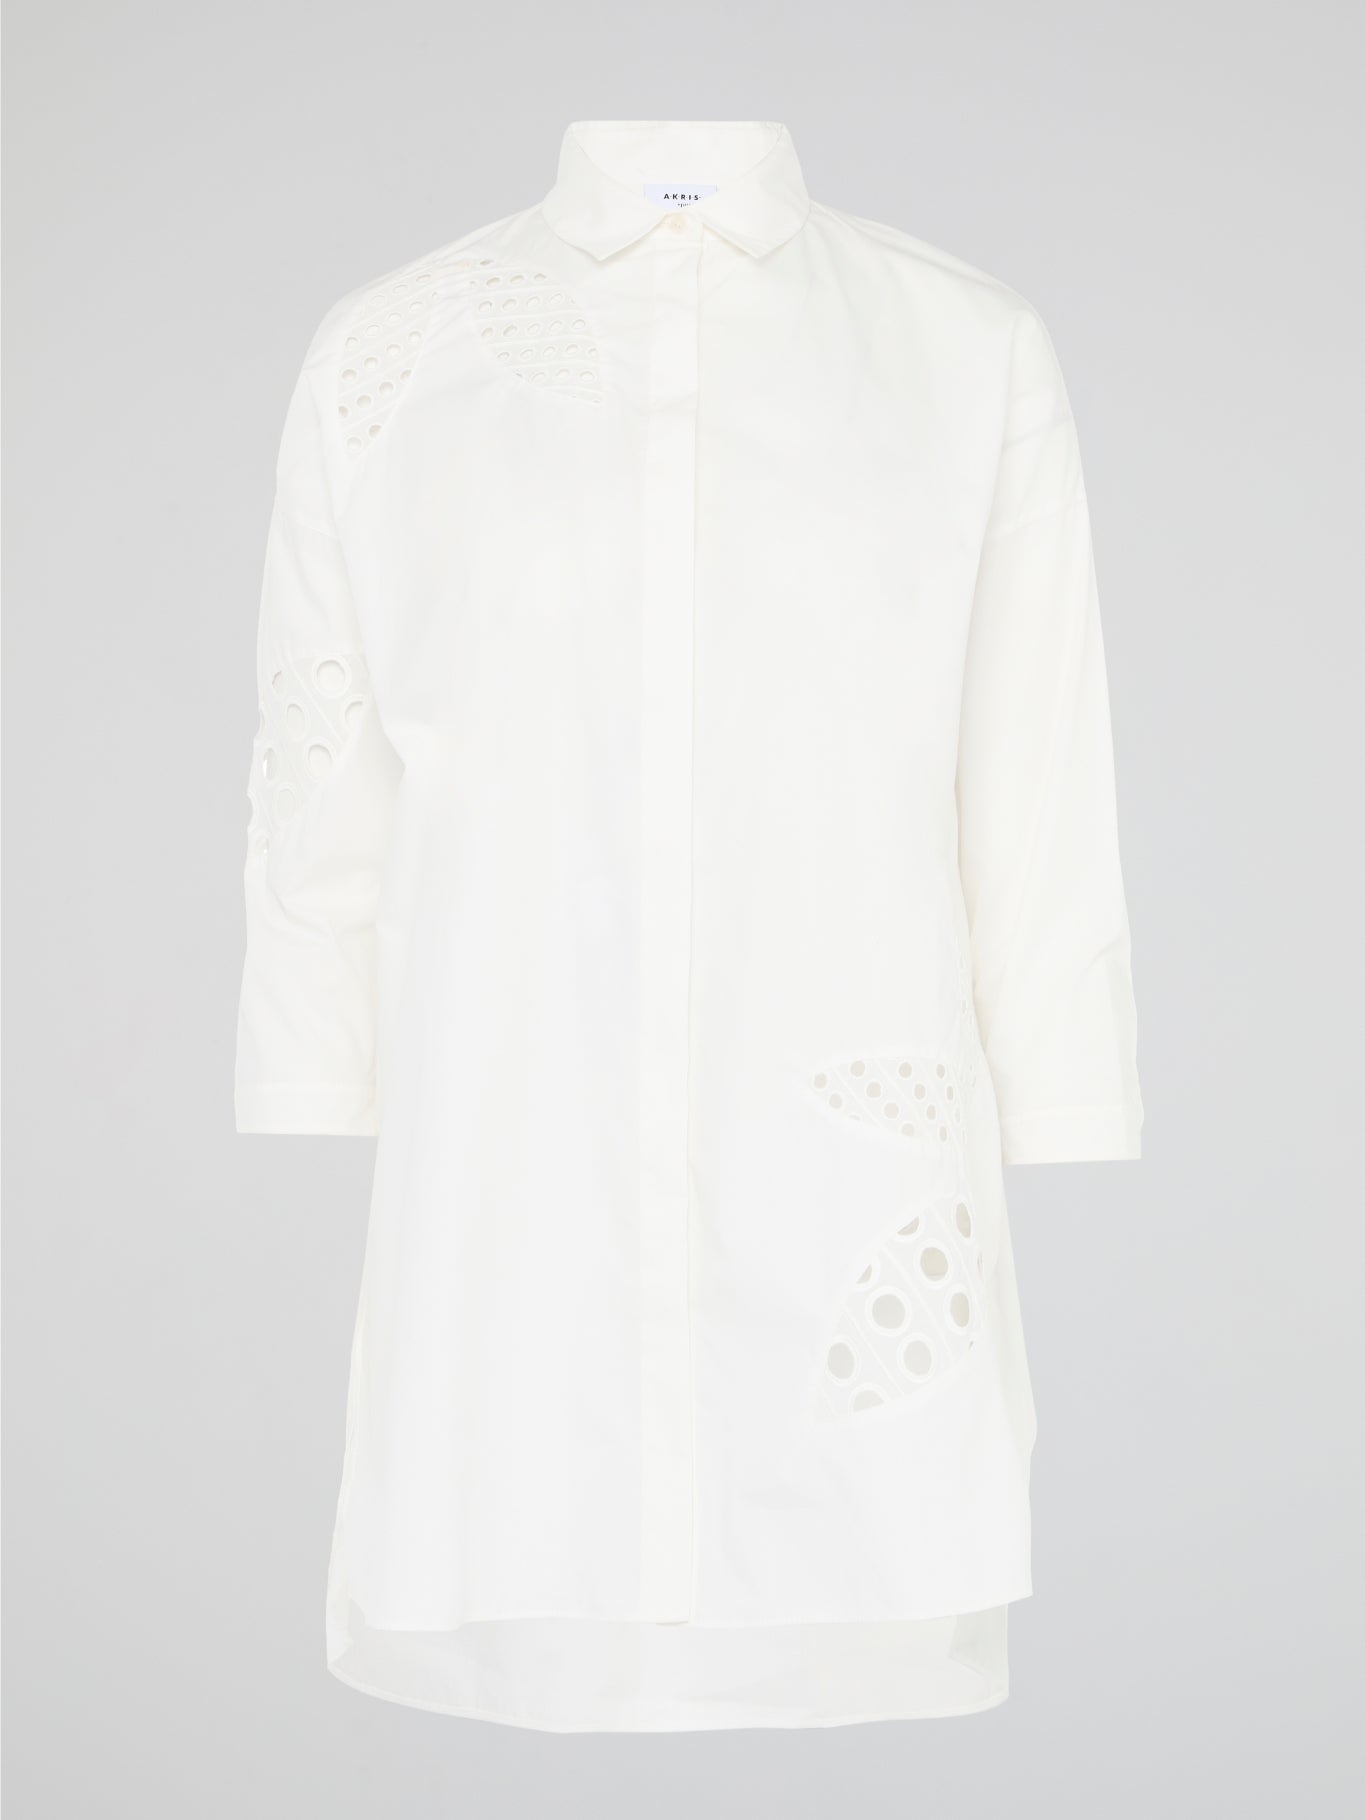 Captivating and versatile, the White Shirt Dress by Akris Punto is a sartorial masterpiece that effortlessly balances elegance and comfort. Its clean lines and crisp white hue exude sophistication, while the relaxed fit and luxurious fabric ensure day-to-night wearability. Whether paired with heels for an evening out or styled with sneakers for a casual brunch, this dress is the epitome of timeless chic.